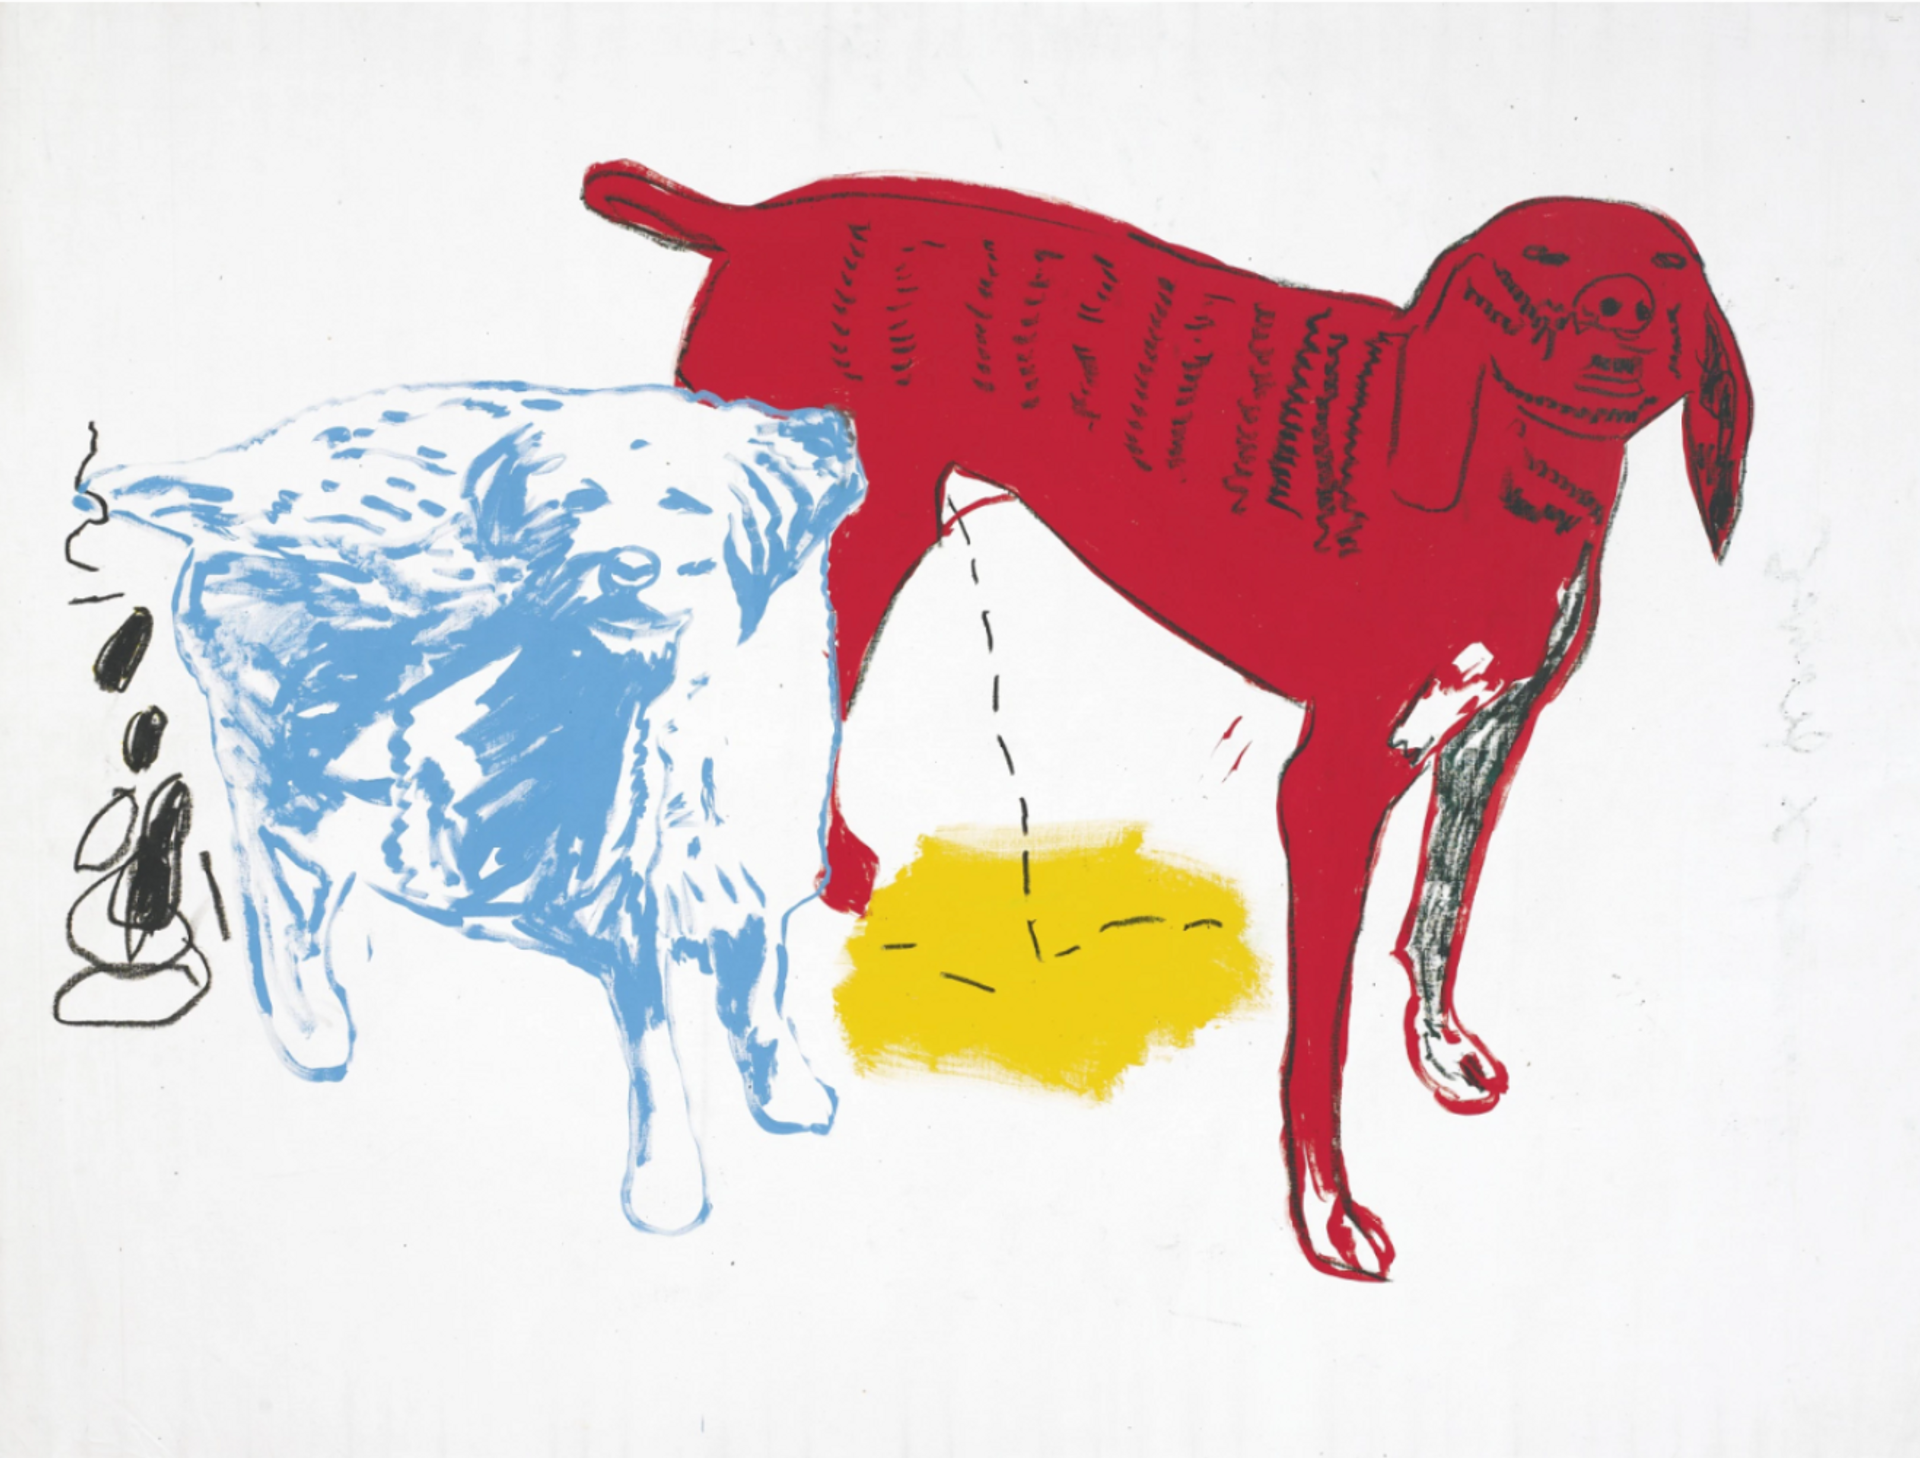 Untitled (two dogs) by Jean-Michel Basquiat and Andy Warhol - MyArtBroker